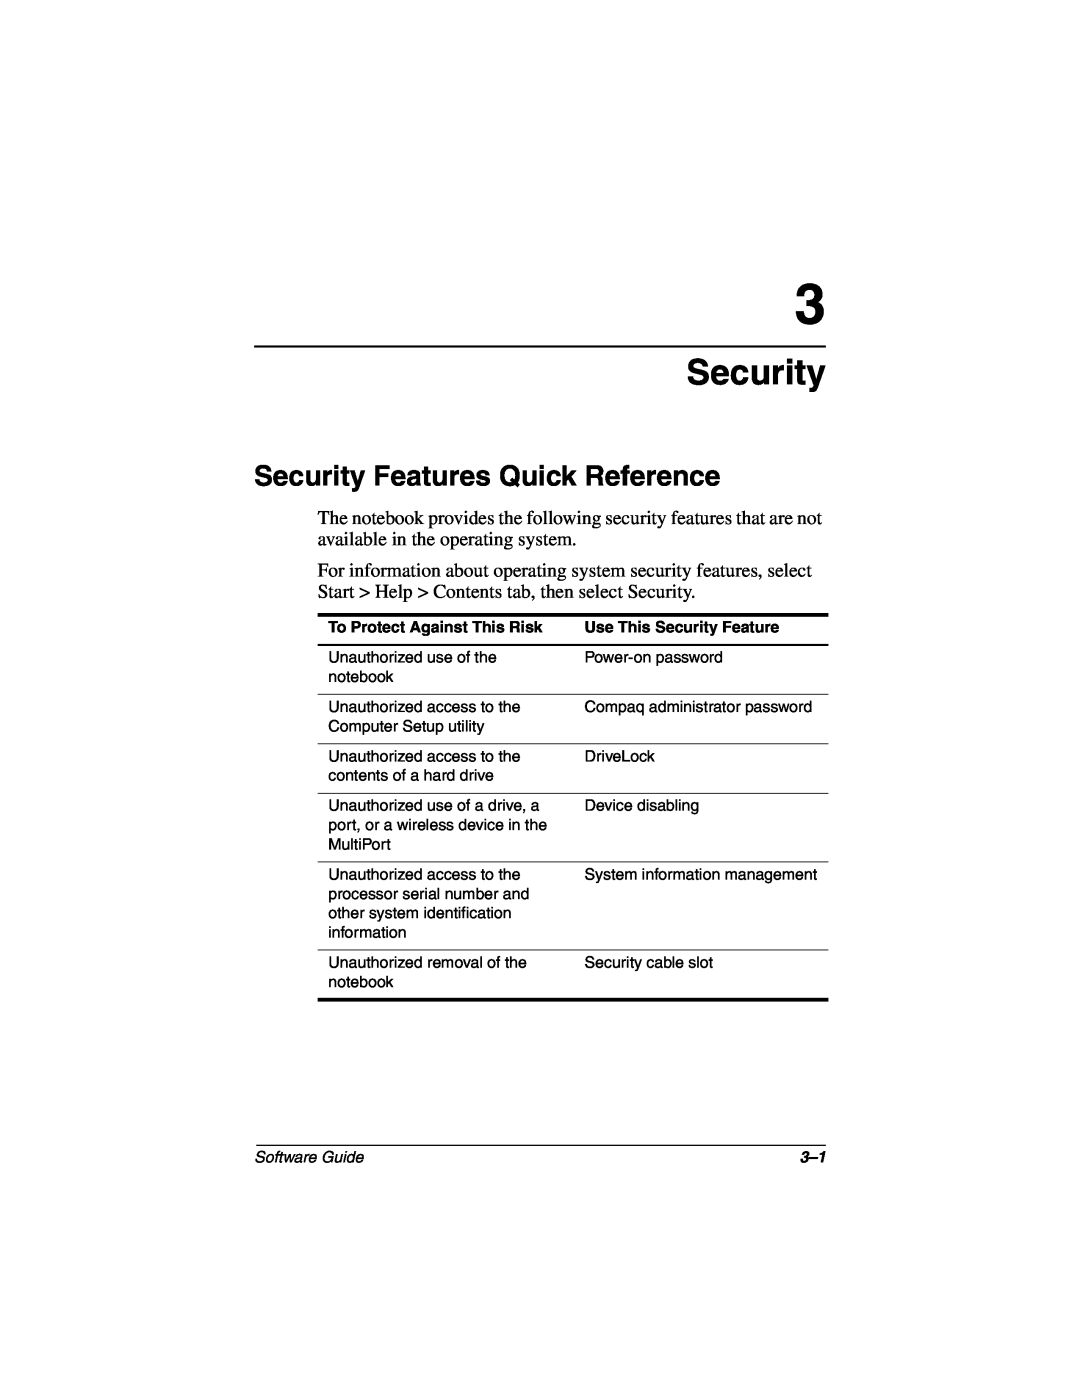 HP 2872AP, 2899AP, 2897AP, 2896AP, 2898AP, 2892AP, 2893AP, 2891AP, 2890AP, 2889AP, 2886AP Security Features Quick Reference 